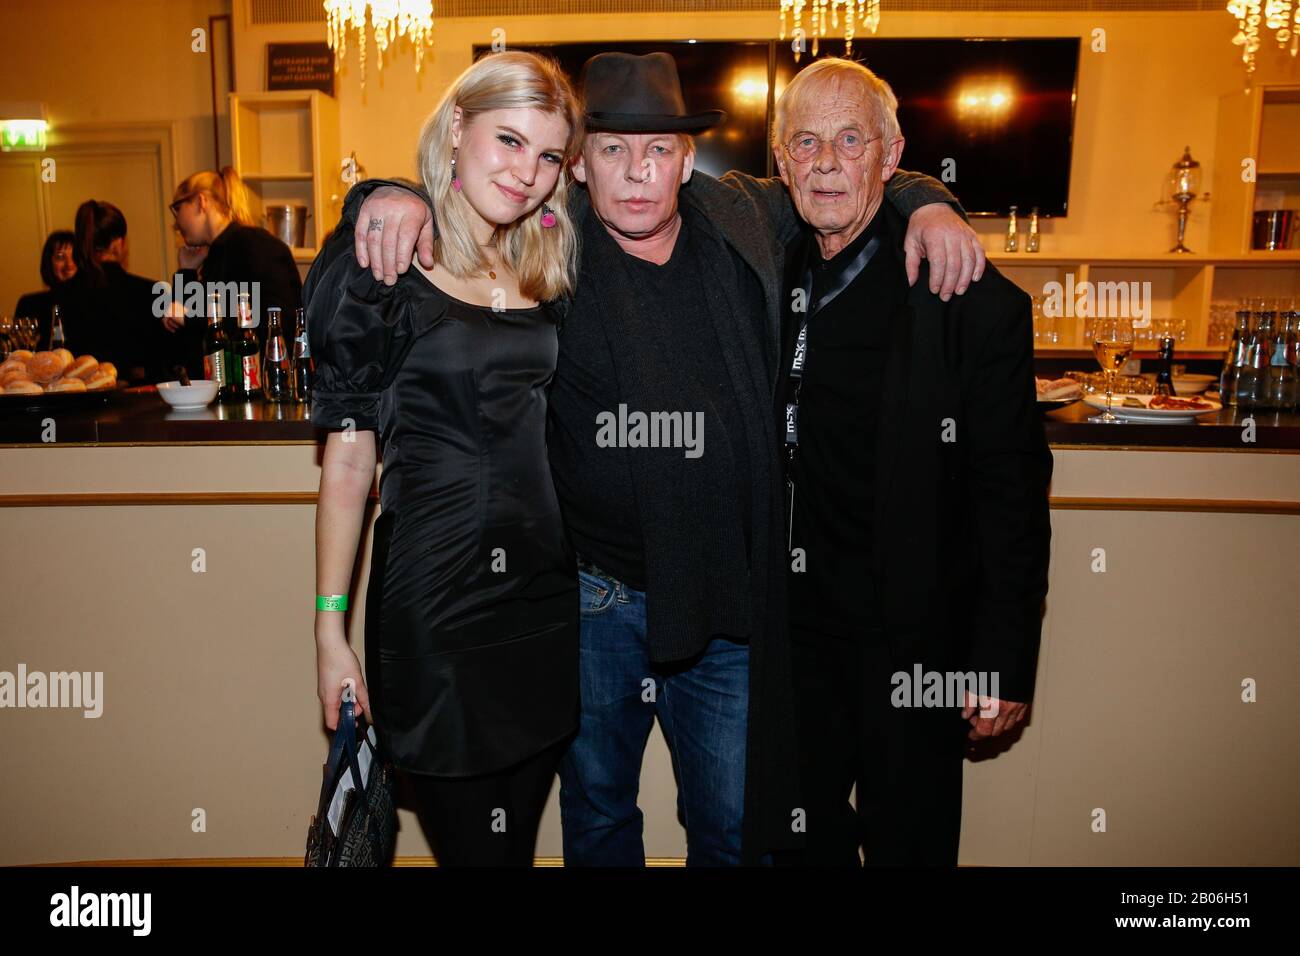 Berlin, Germany. 18th Feb, 2020. Lilith Maria Dörthe Becker (l-r), Ben  Becker and father Rolf Becker come to the premiere of the play 